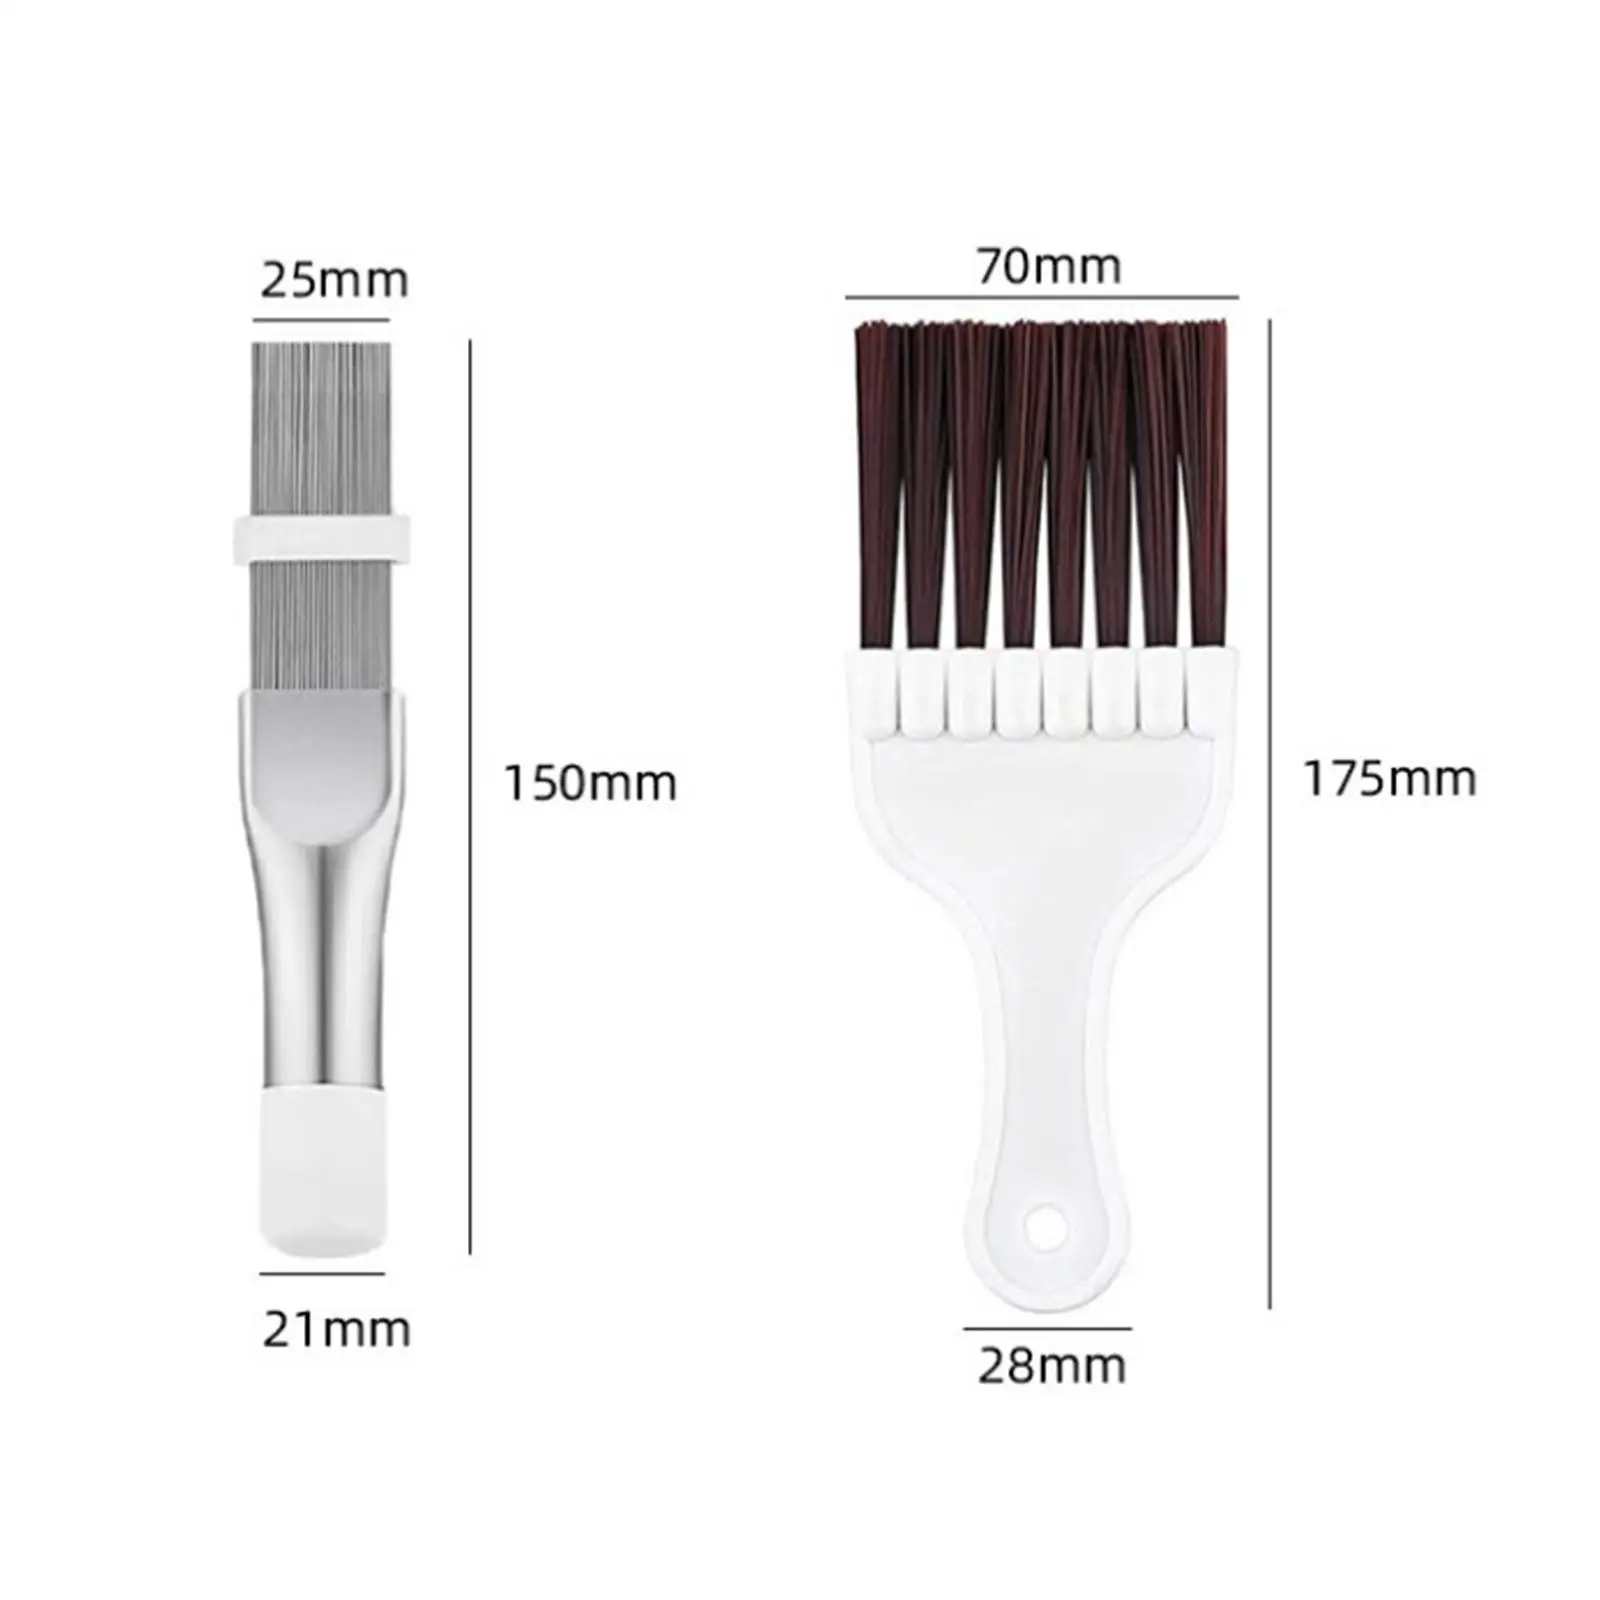 4Pcs Air Conditioner Fin Cleaner Set Coil Cleaning Brush Repair Clean Tool